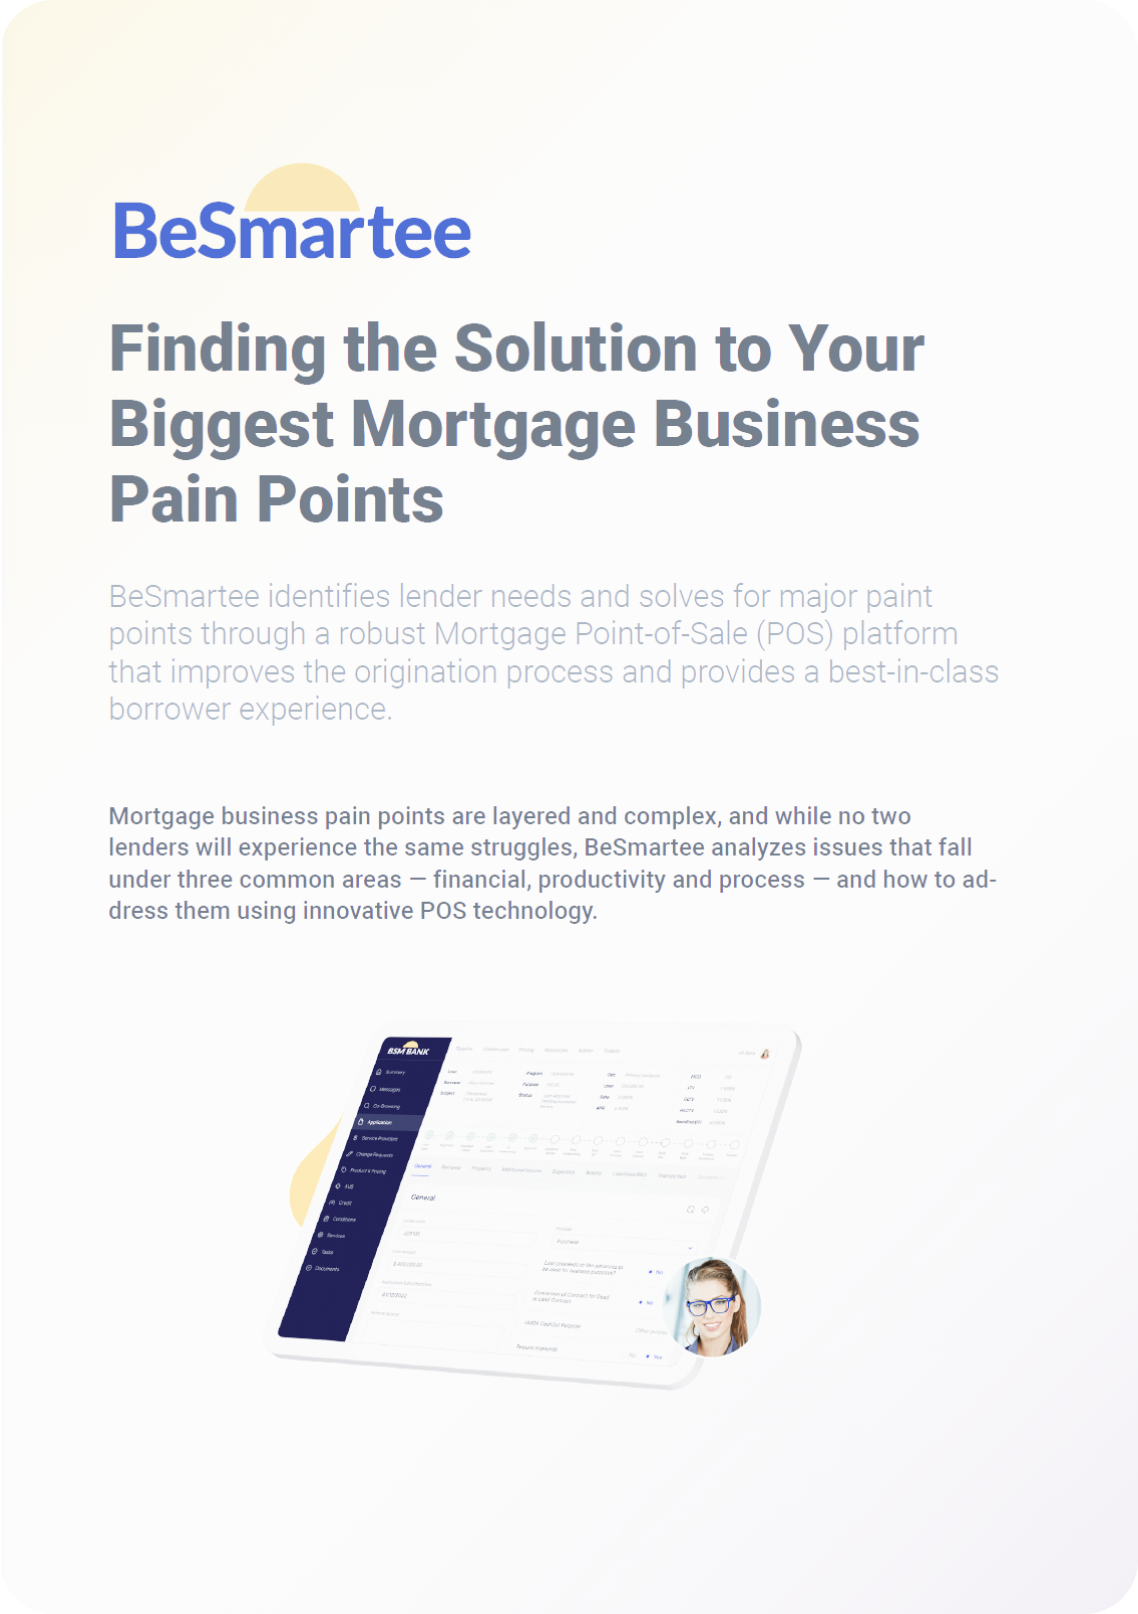 Finding the solution to your biggest mortgage business pain points